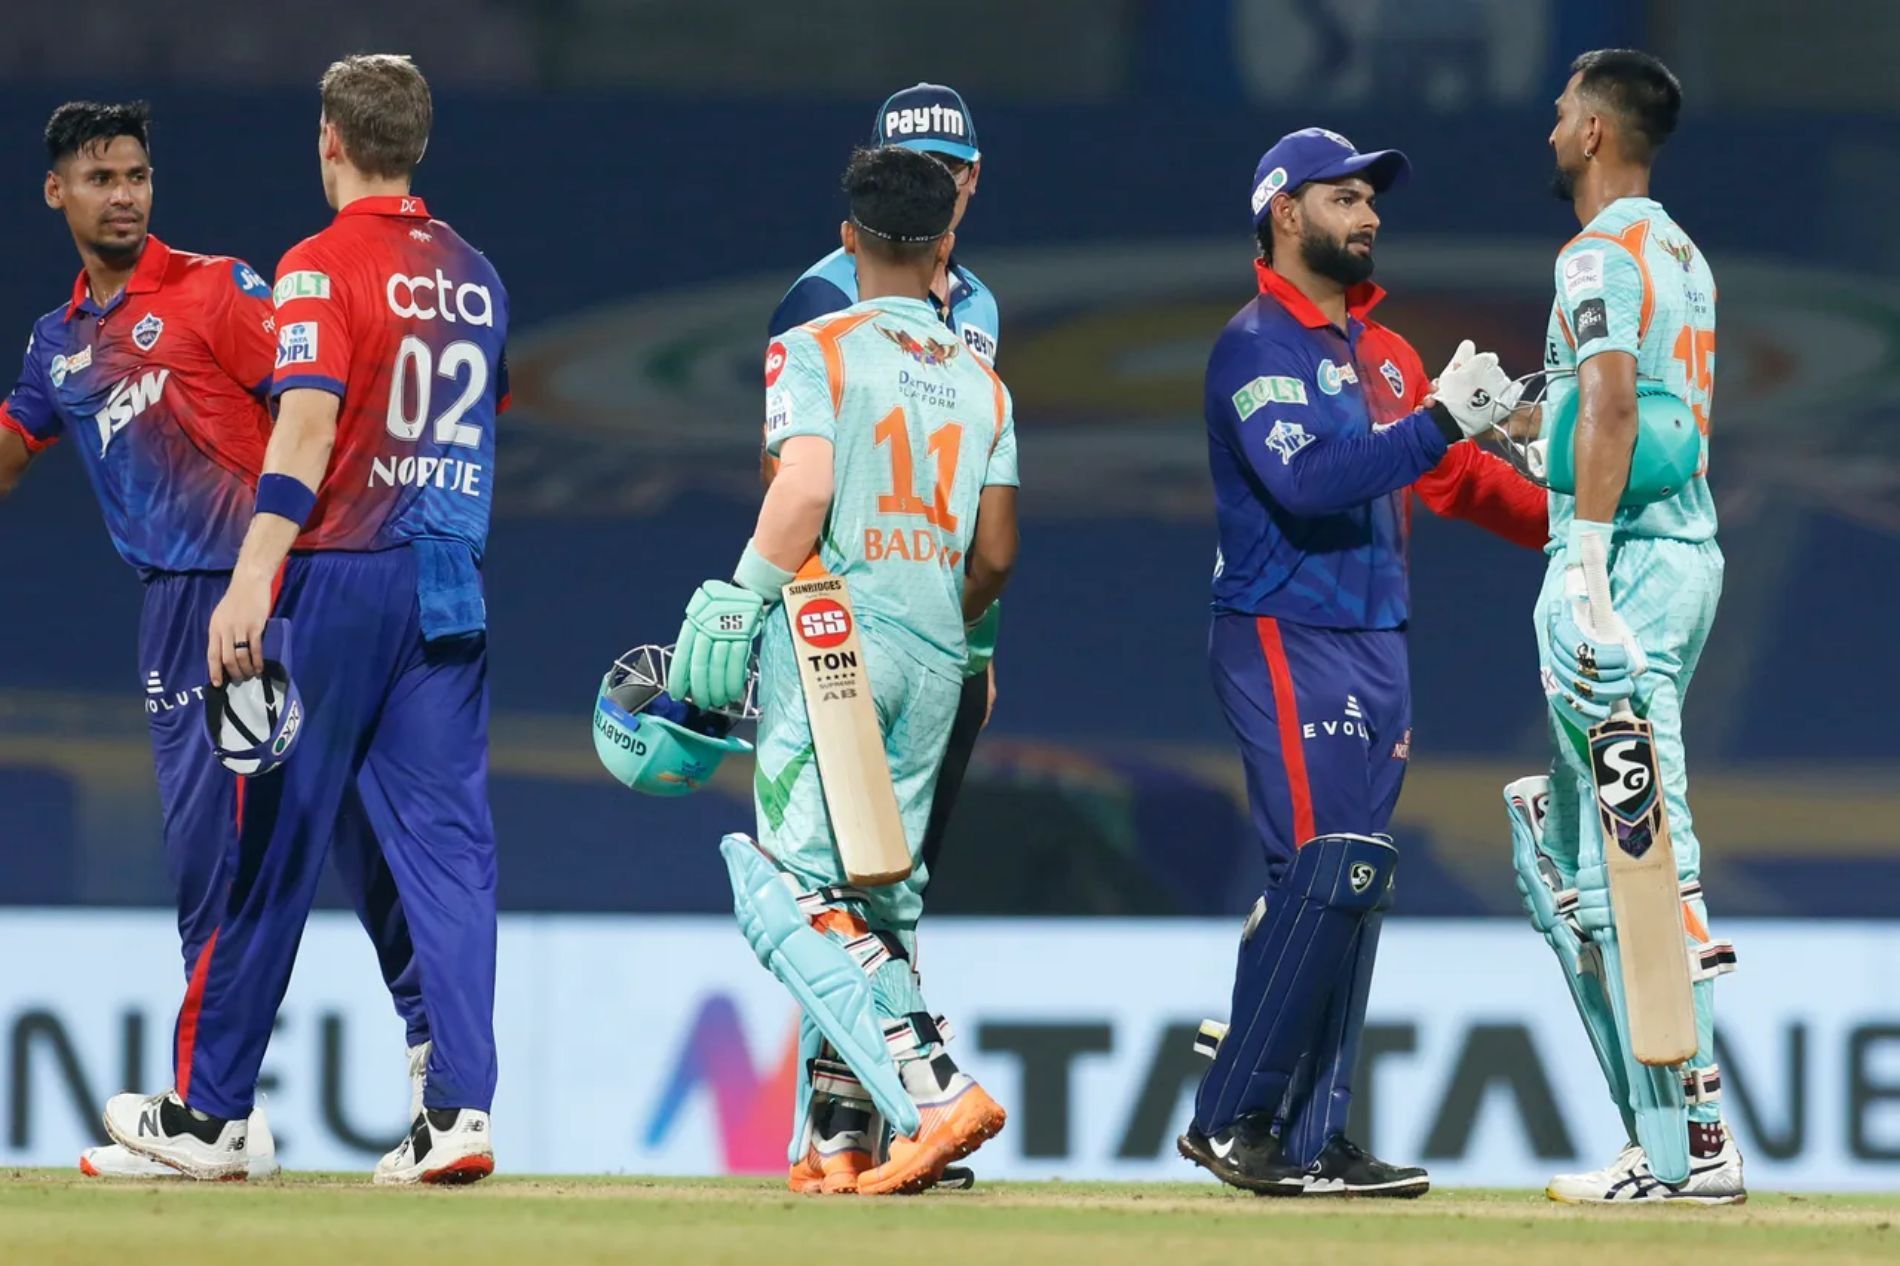 DC and LSG players shake hands after the match. Pic: IPLT20.COM